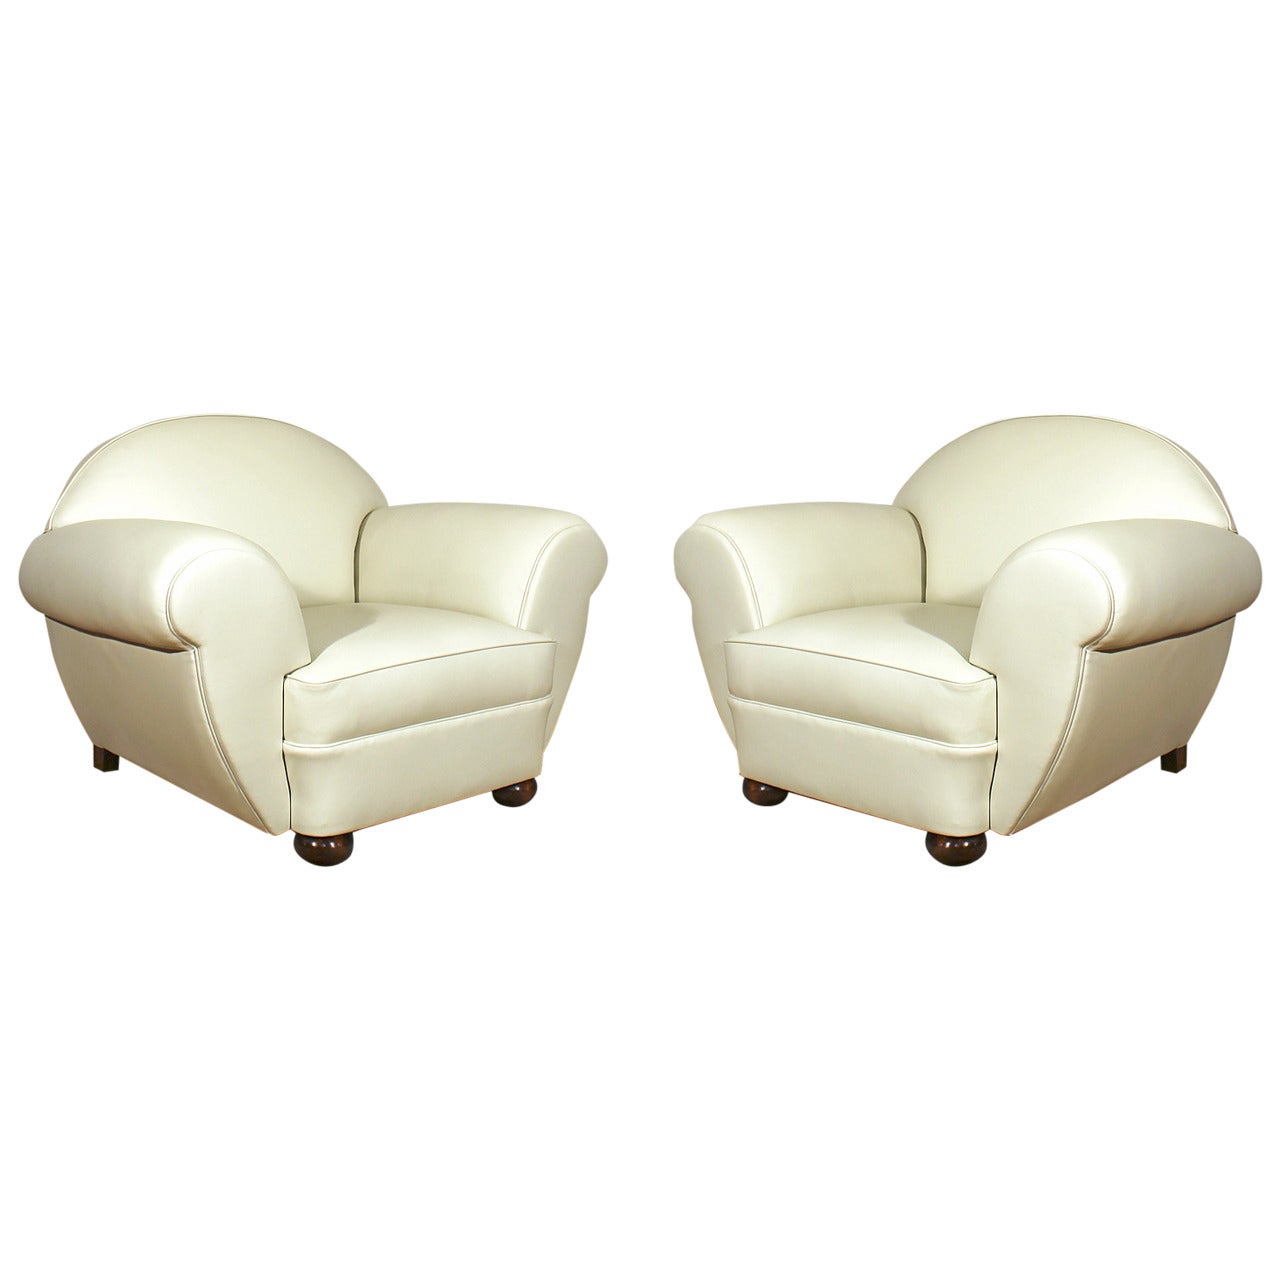 Pair of Large Art Deco Club Armchairs in Ivory Leather - Belgium